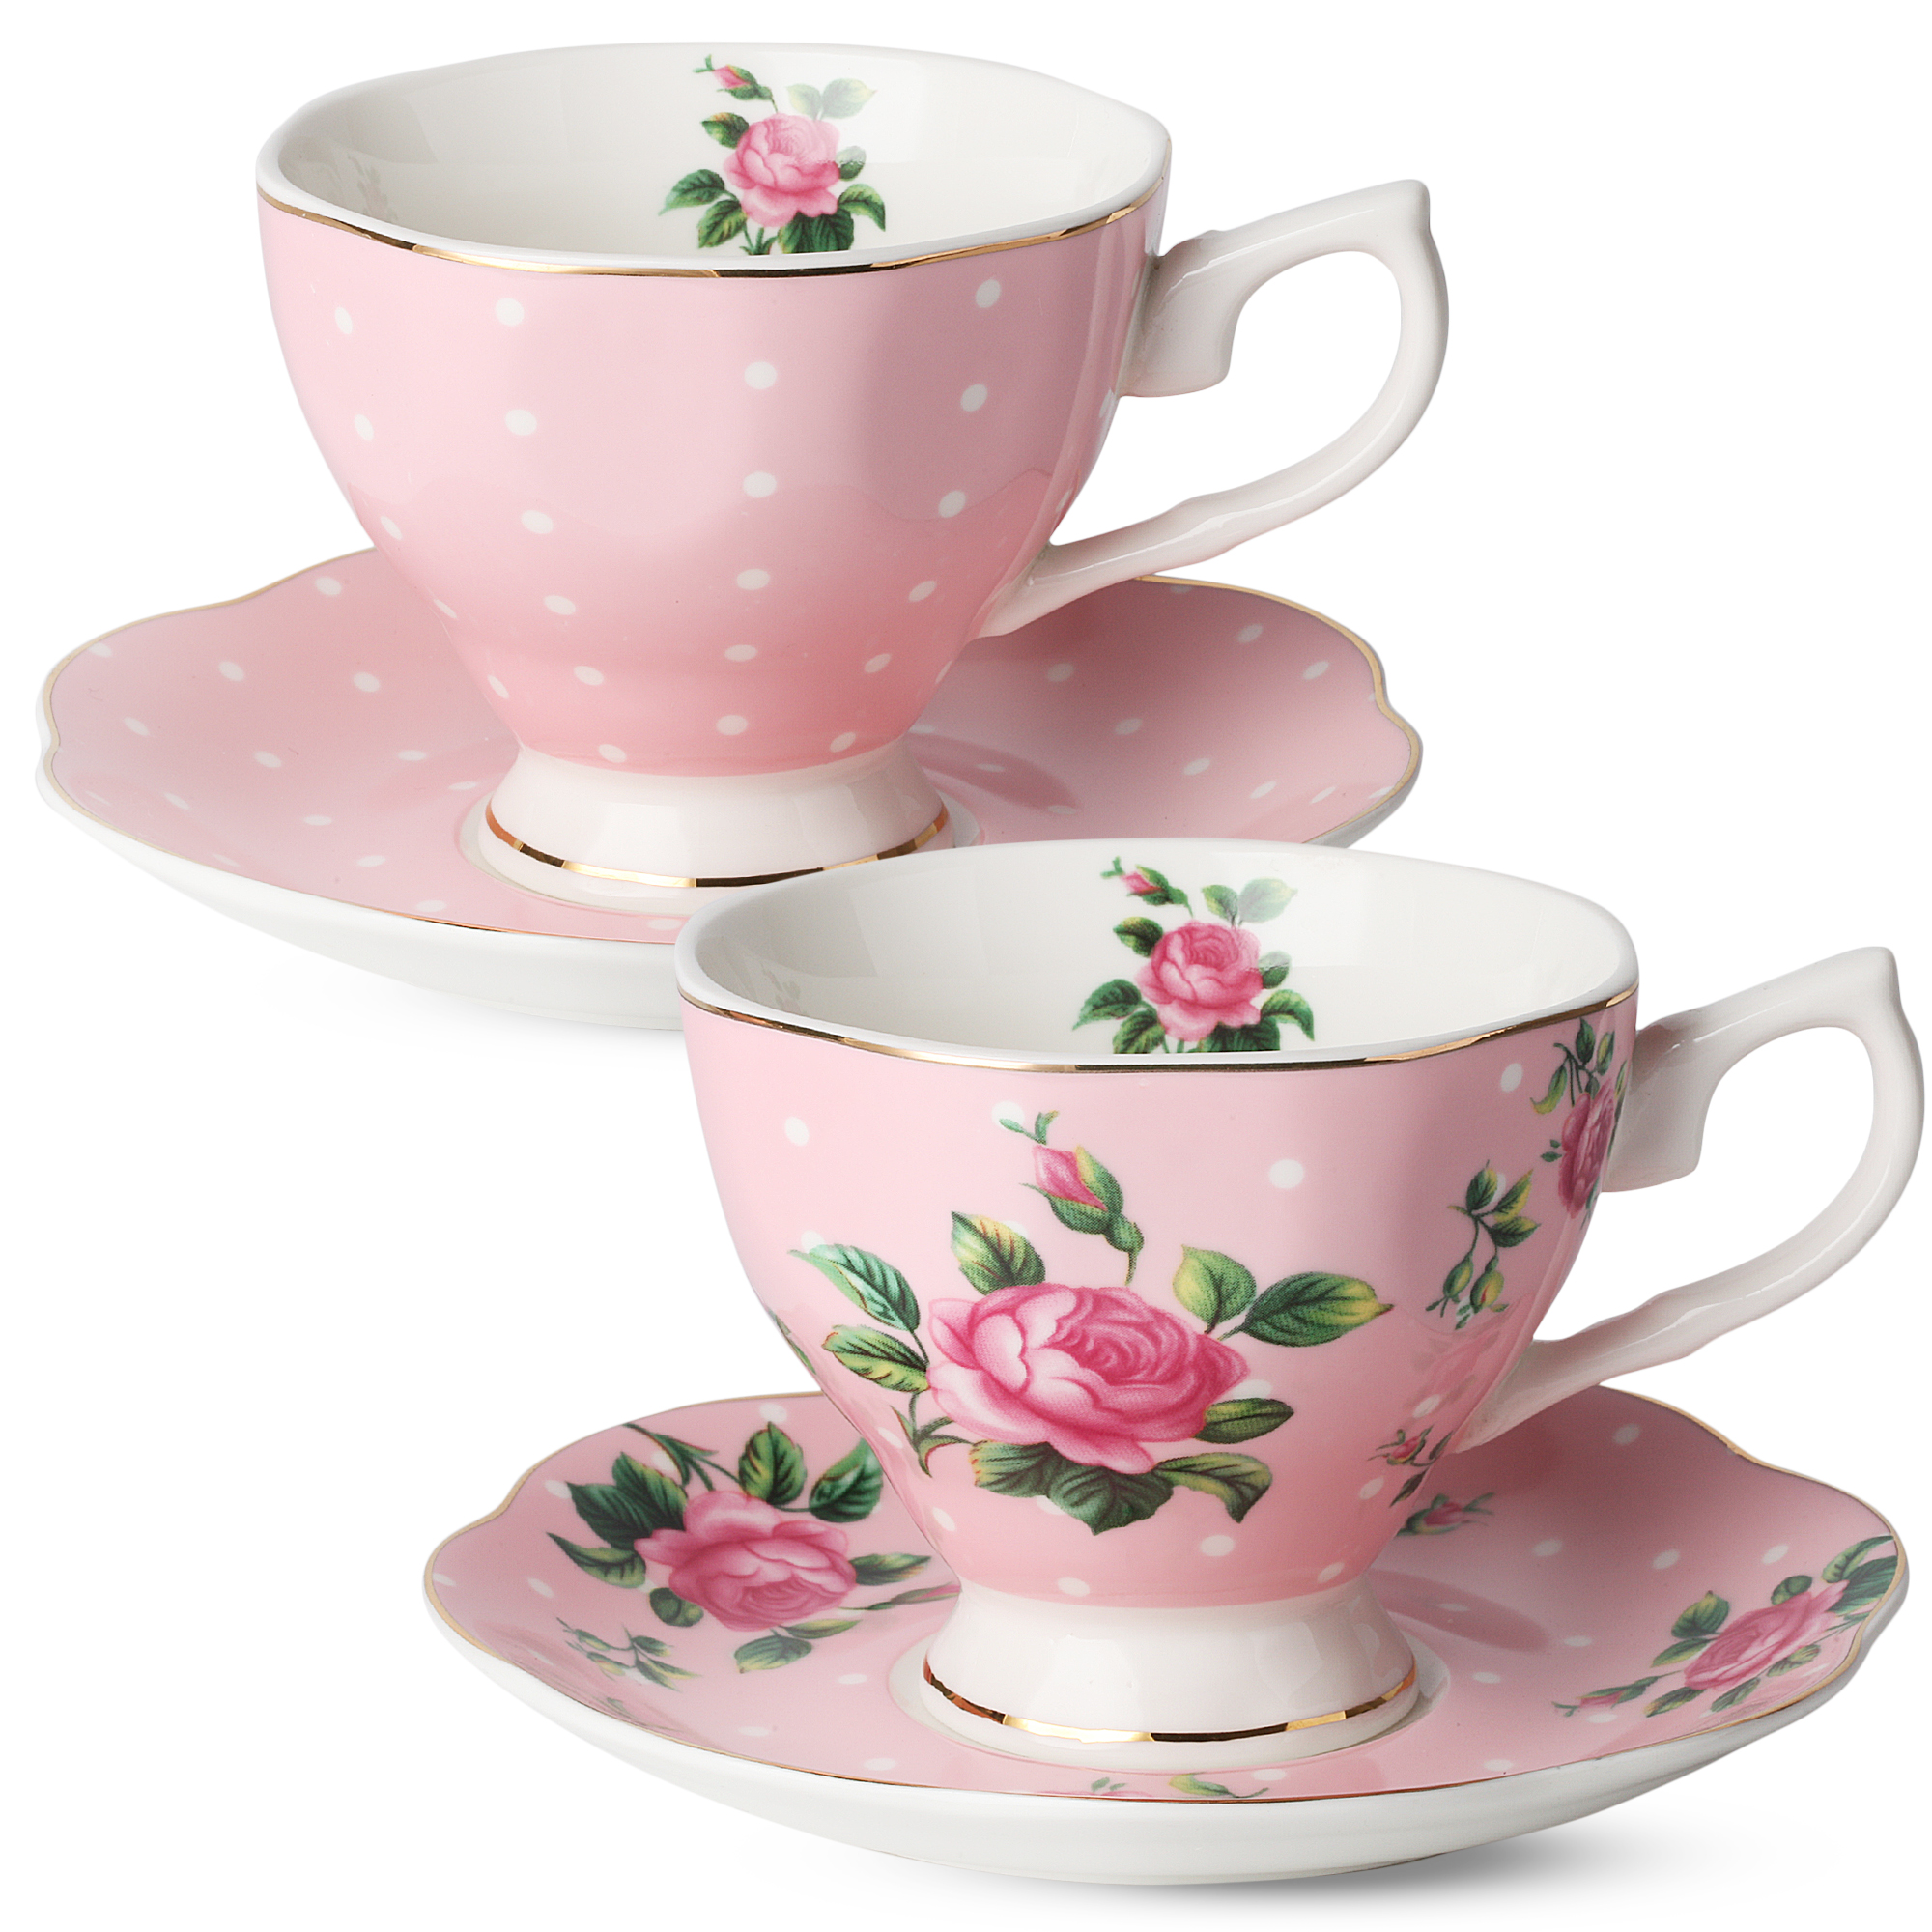 1 Set Display & Holiday Gift,Flower,with Gift Box NDHT Bone China Teacups/Coffee Cups & Saucers Sets with Spoons-6.7Oz for Home Restaurants